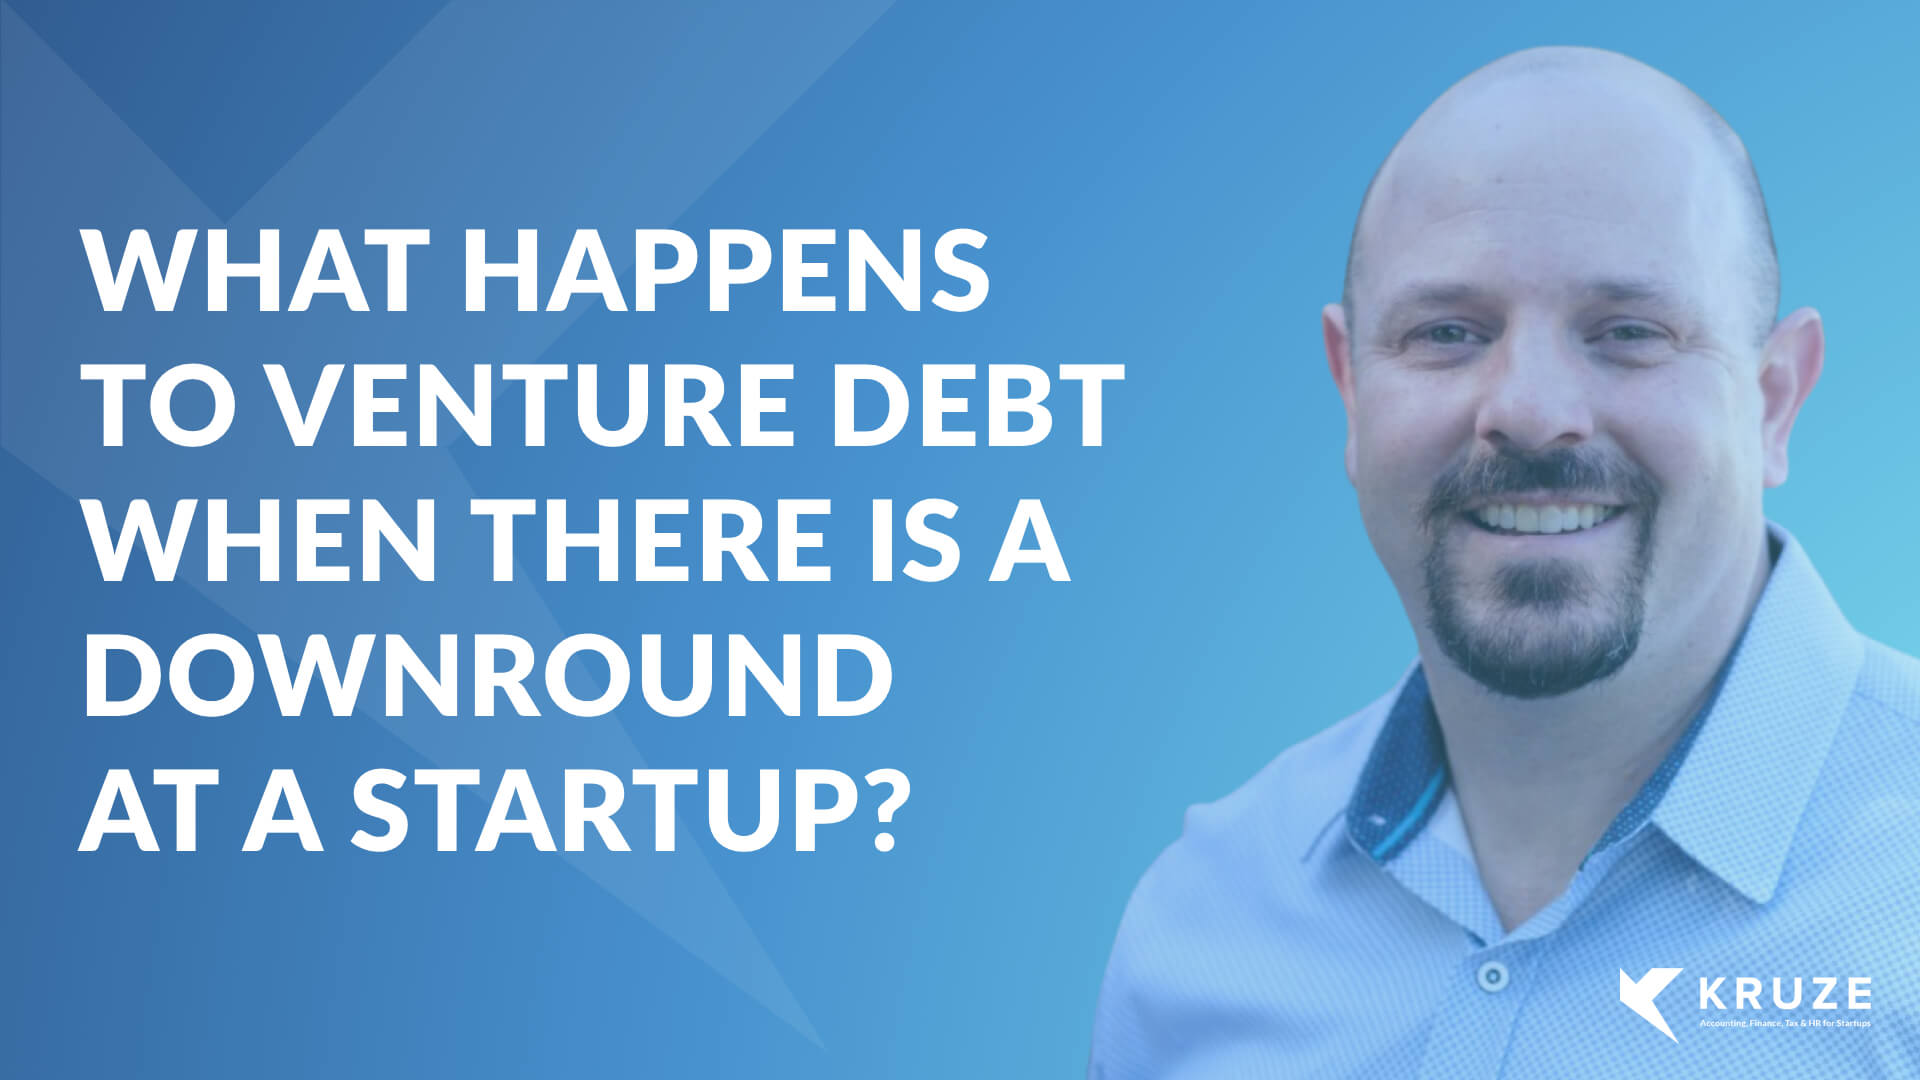 What Happens to Venture Debt in a Downround?